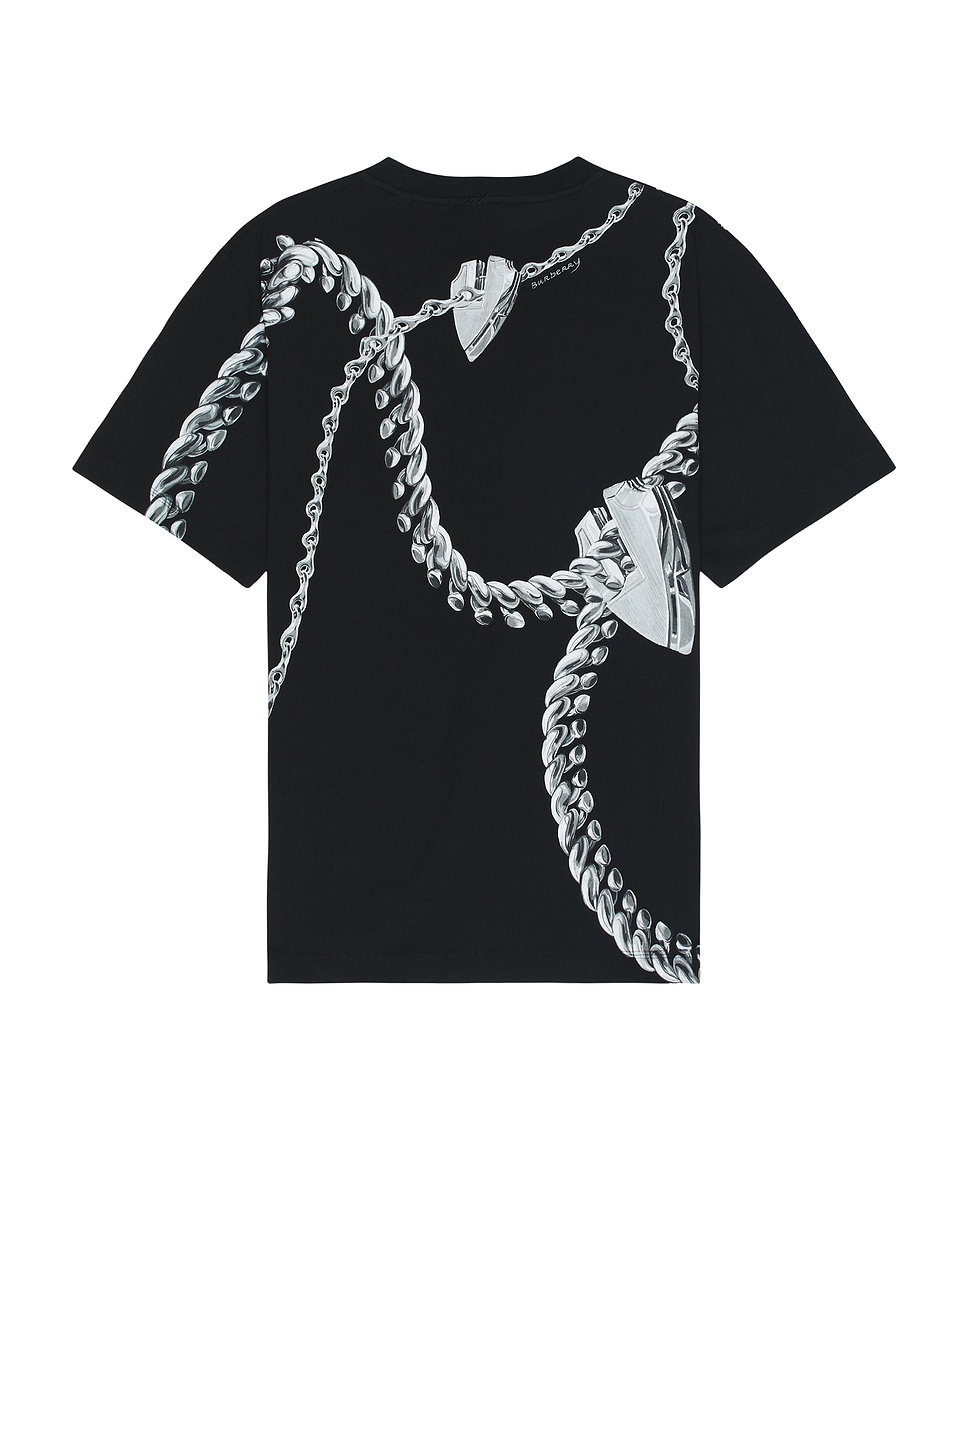 Image 1 of Burberry Graphic Tee in Black Ip Pattern